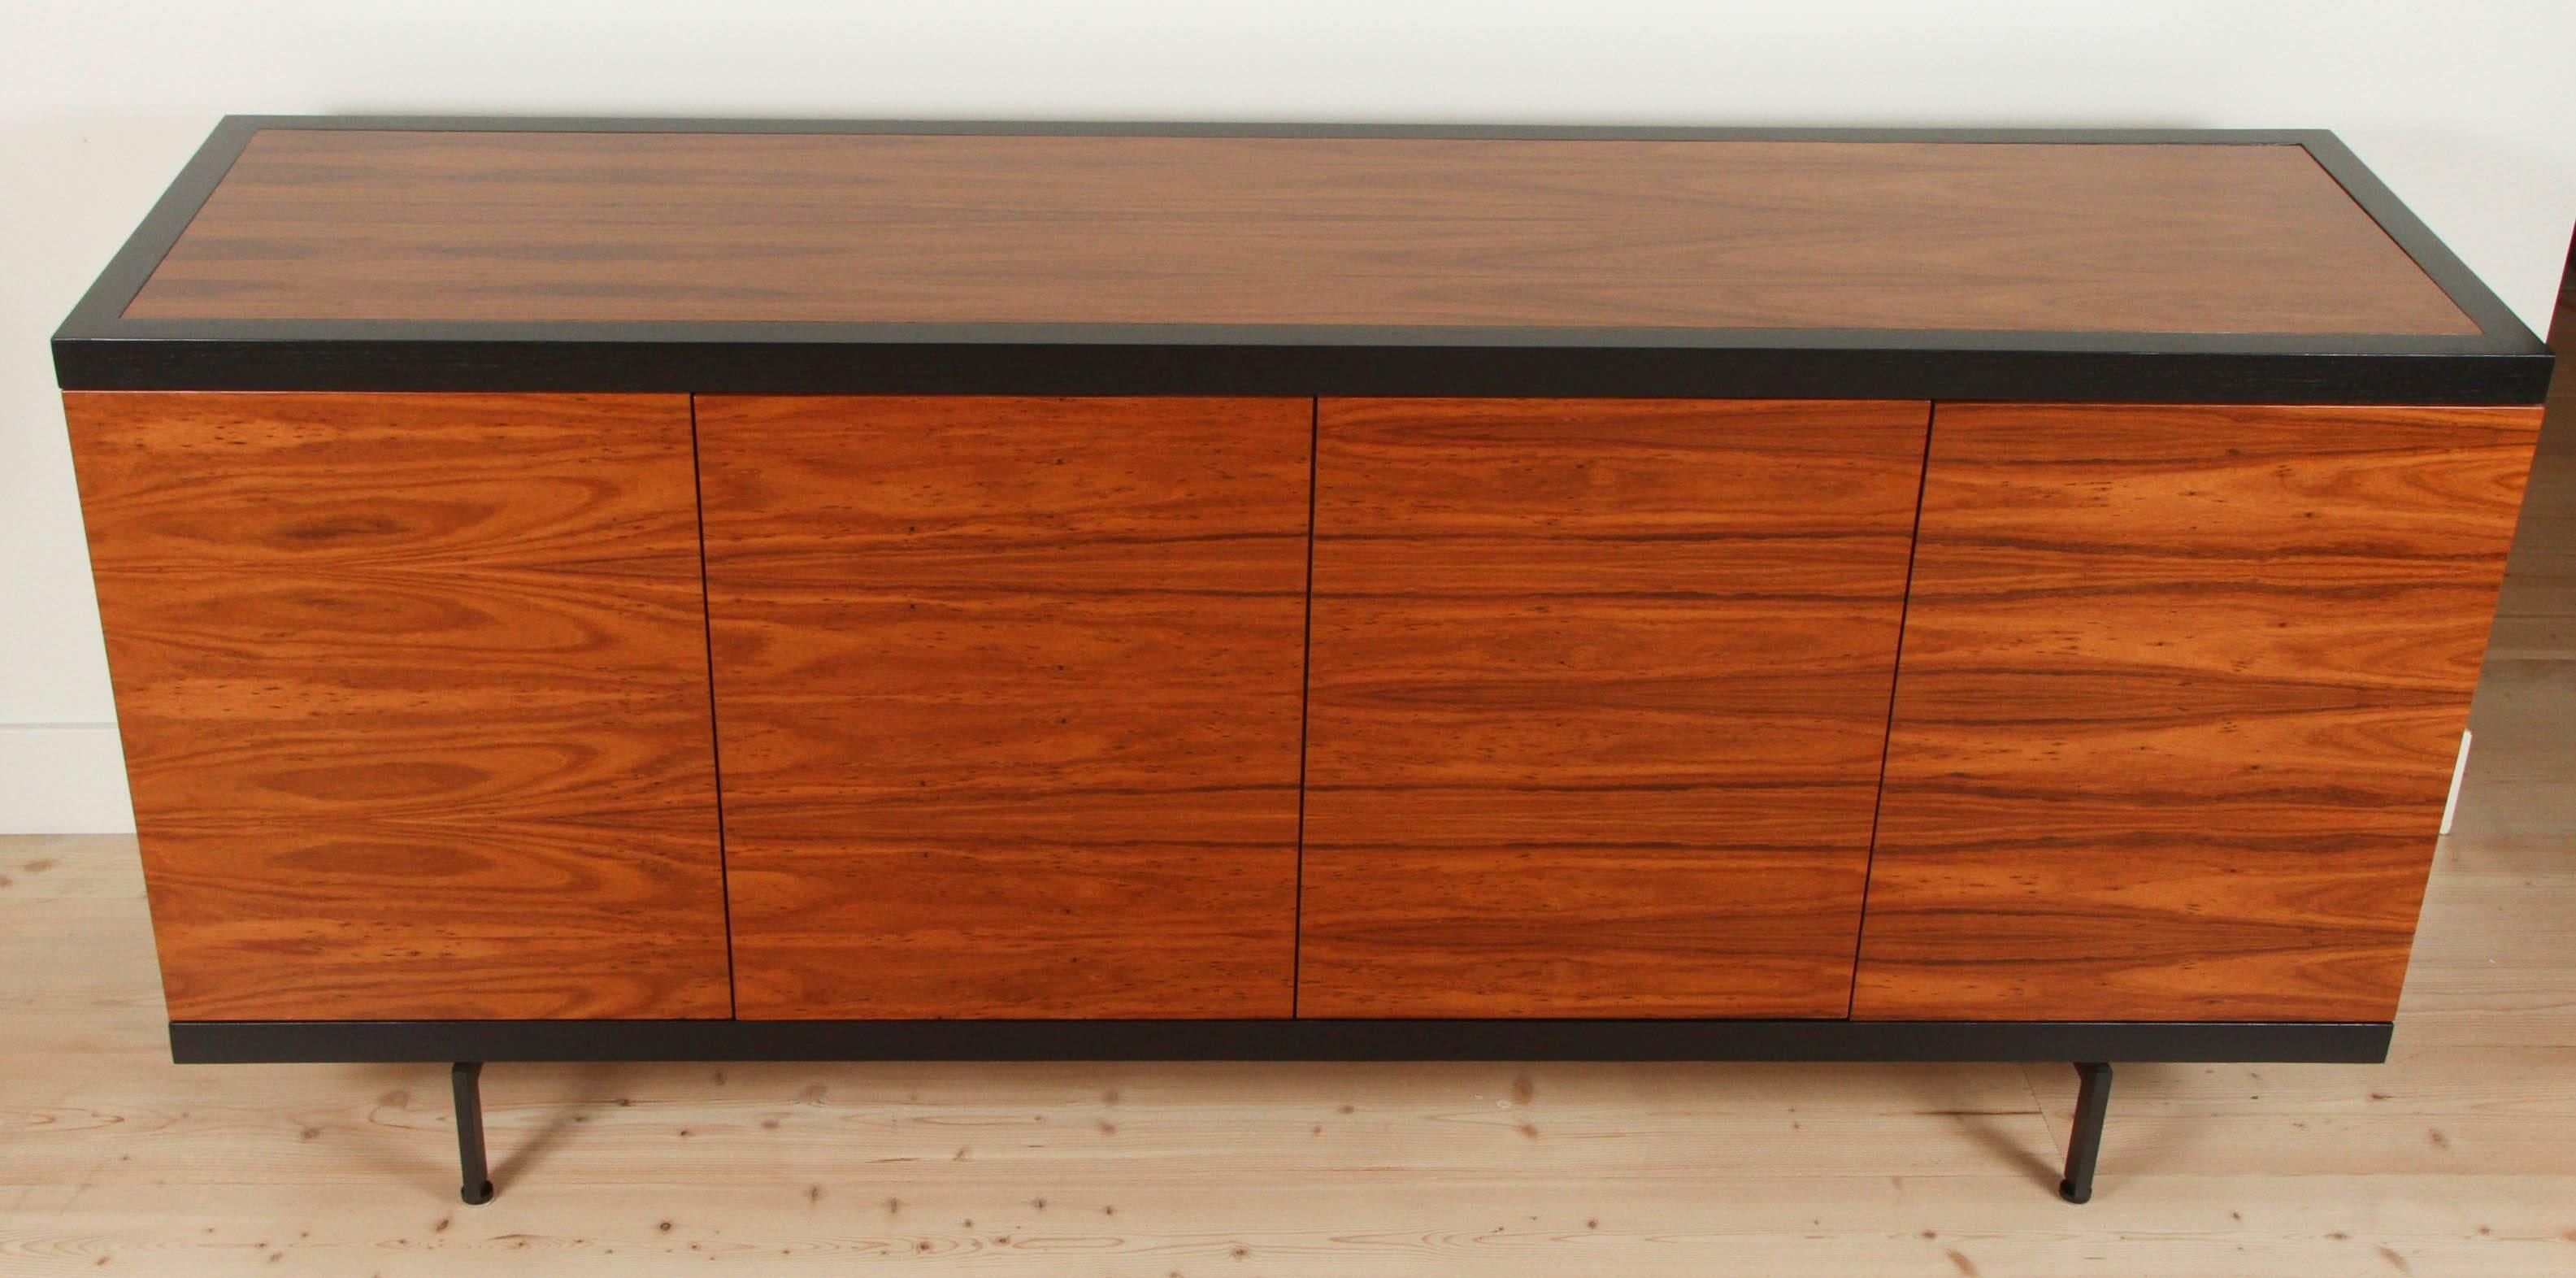 American Four-Door Rosewood Dimas Cabinet by Lawson-Fenning